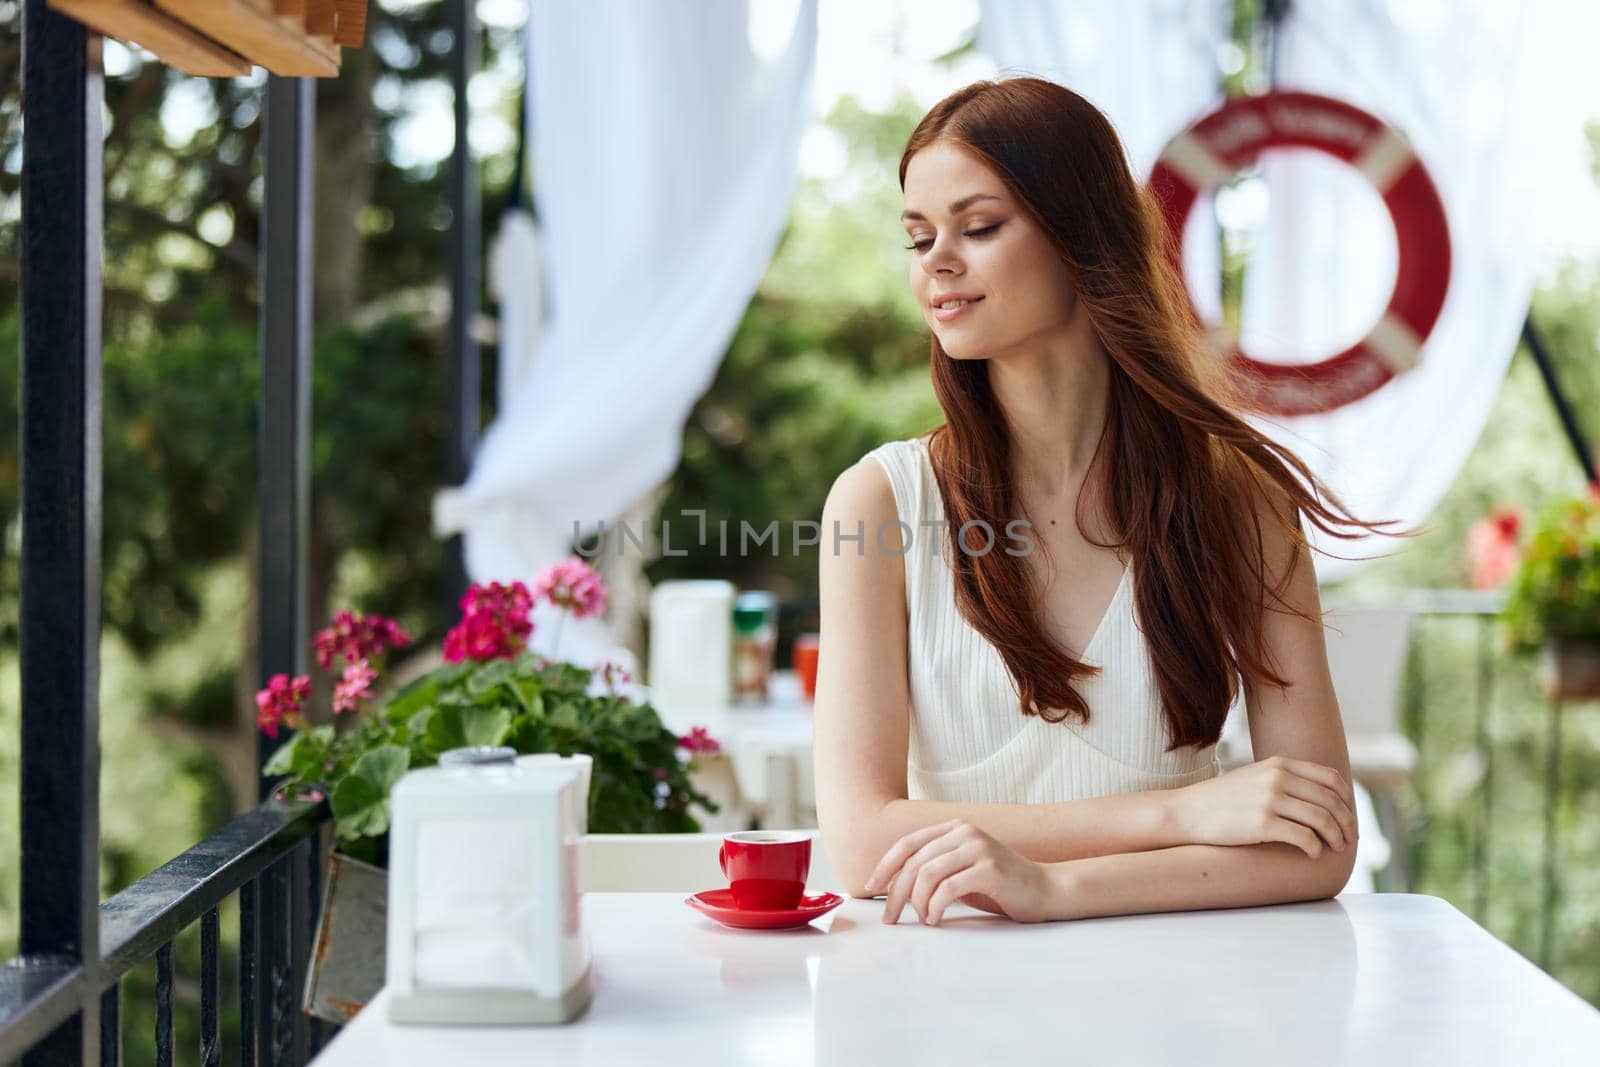 beautiful woman holding a coffee cup standing in the park at summer Relaxation concept by SHOTPRIME